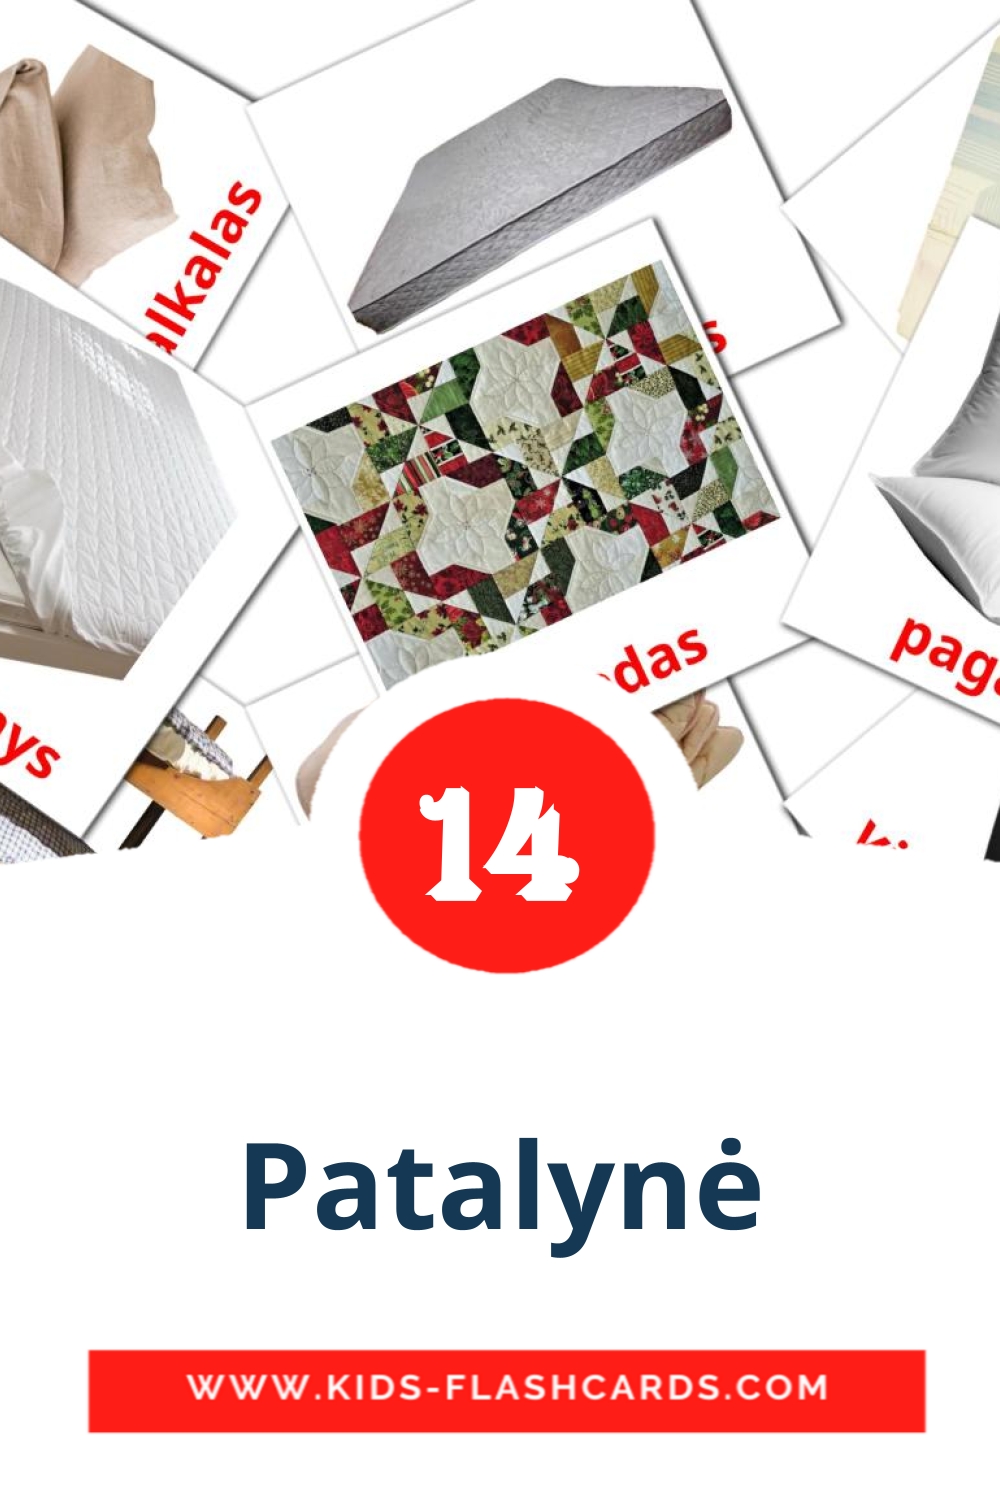 14 Patalynė Picture Cards for Kindergarden in lithuanian